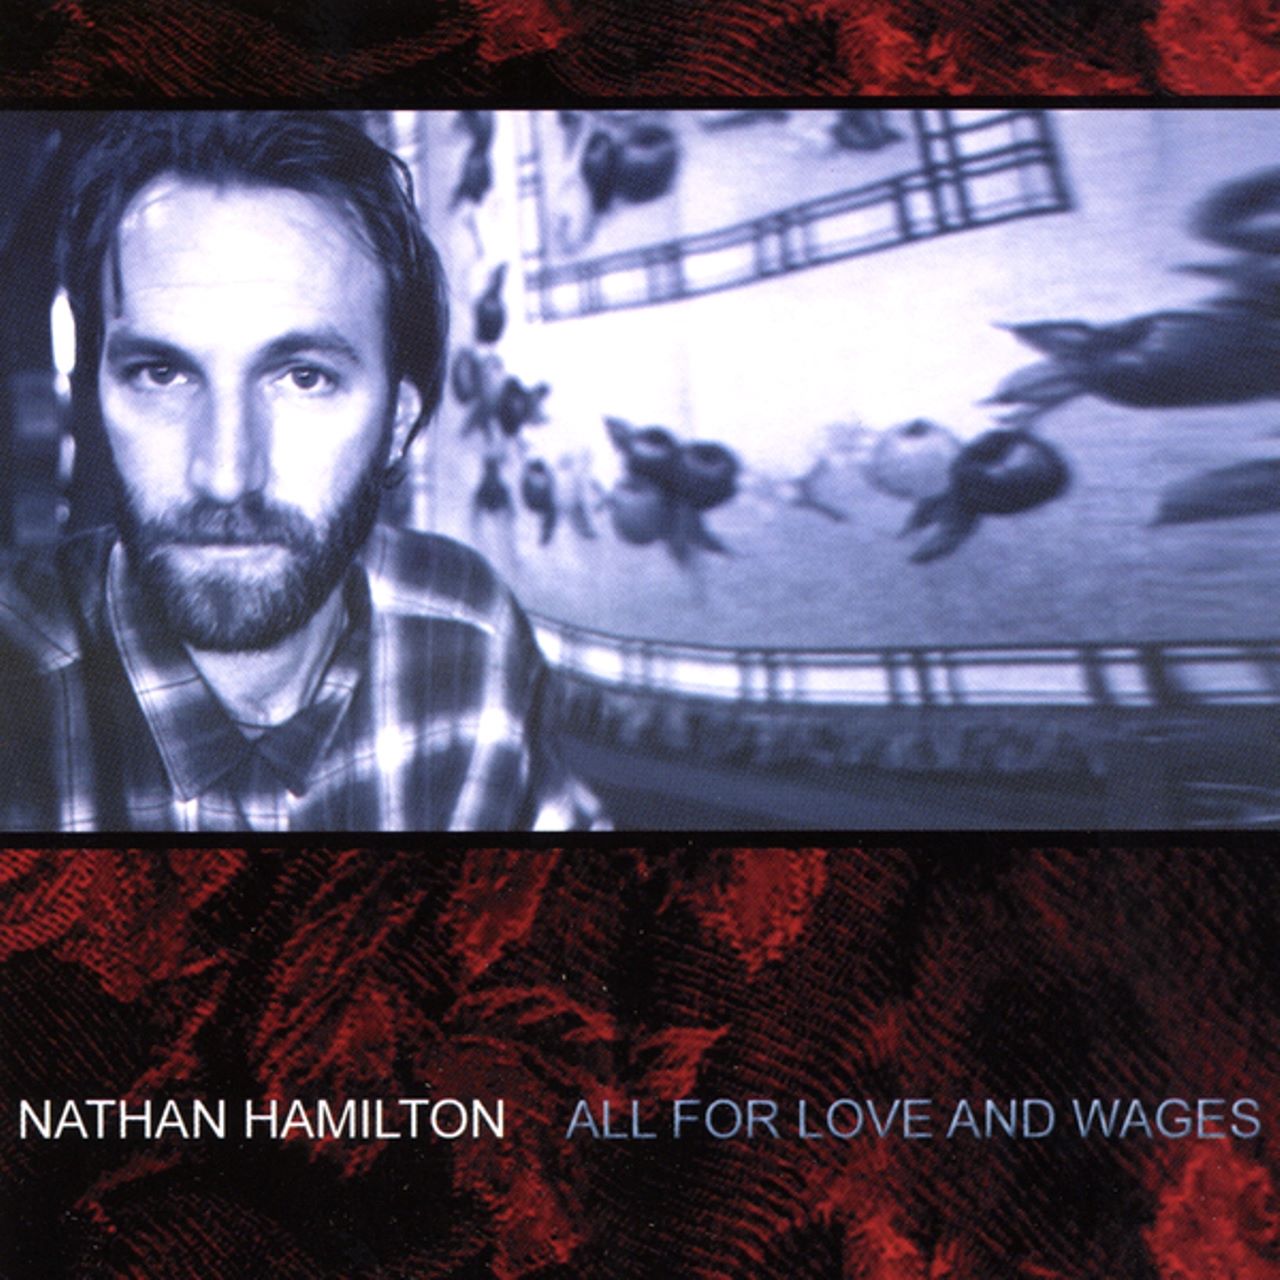 Nathan Hamilton - All For Love And Wages cover album